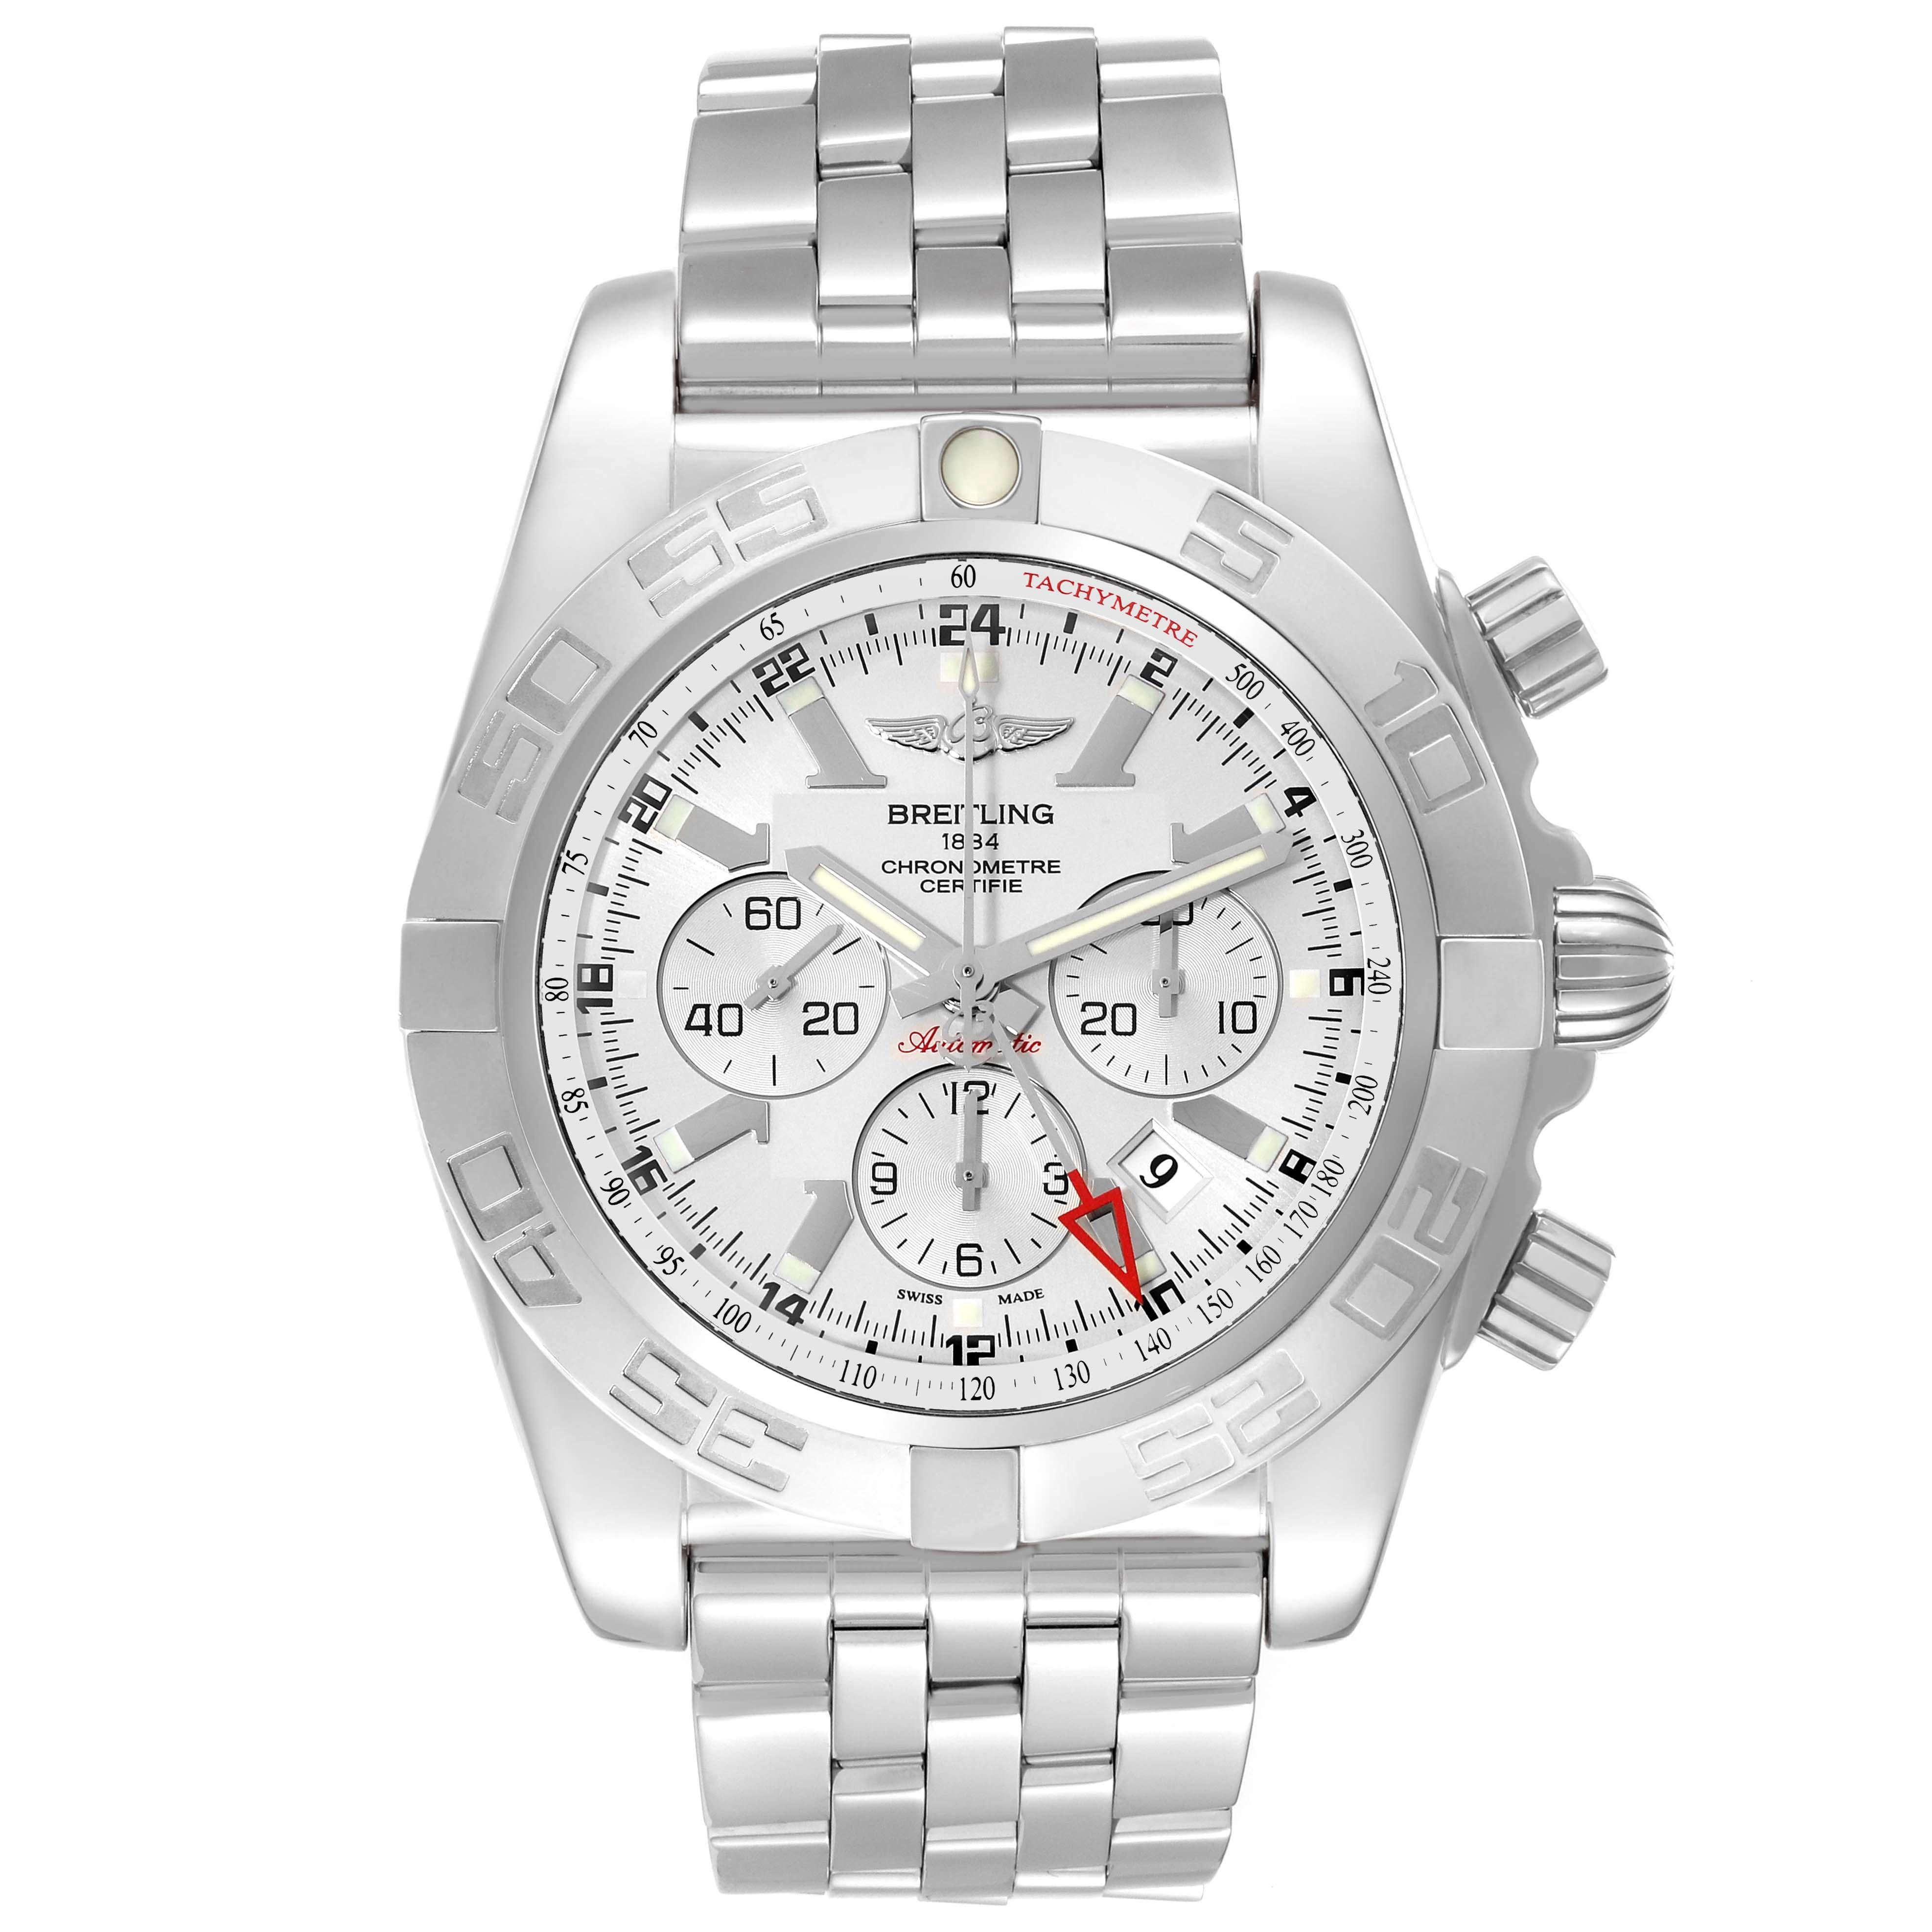 Breitling Chronomat GMT Steel Silver Dial Mens Watch AB0410 Box Papers. Self-winding automatic officially certified chronometer movement. Chronograph function. GMT function. Stainless steel case 47.0 mm in diameter with screwed-down crown and